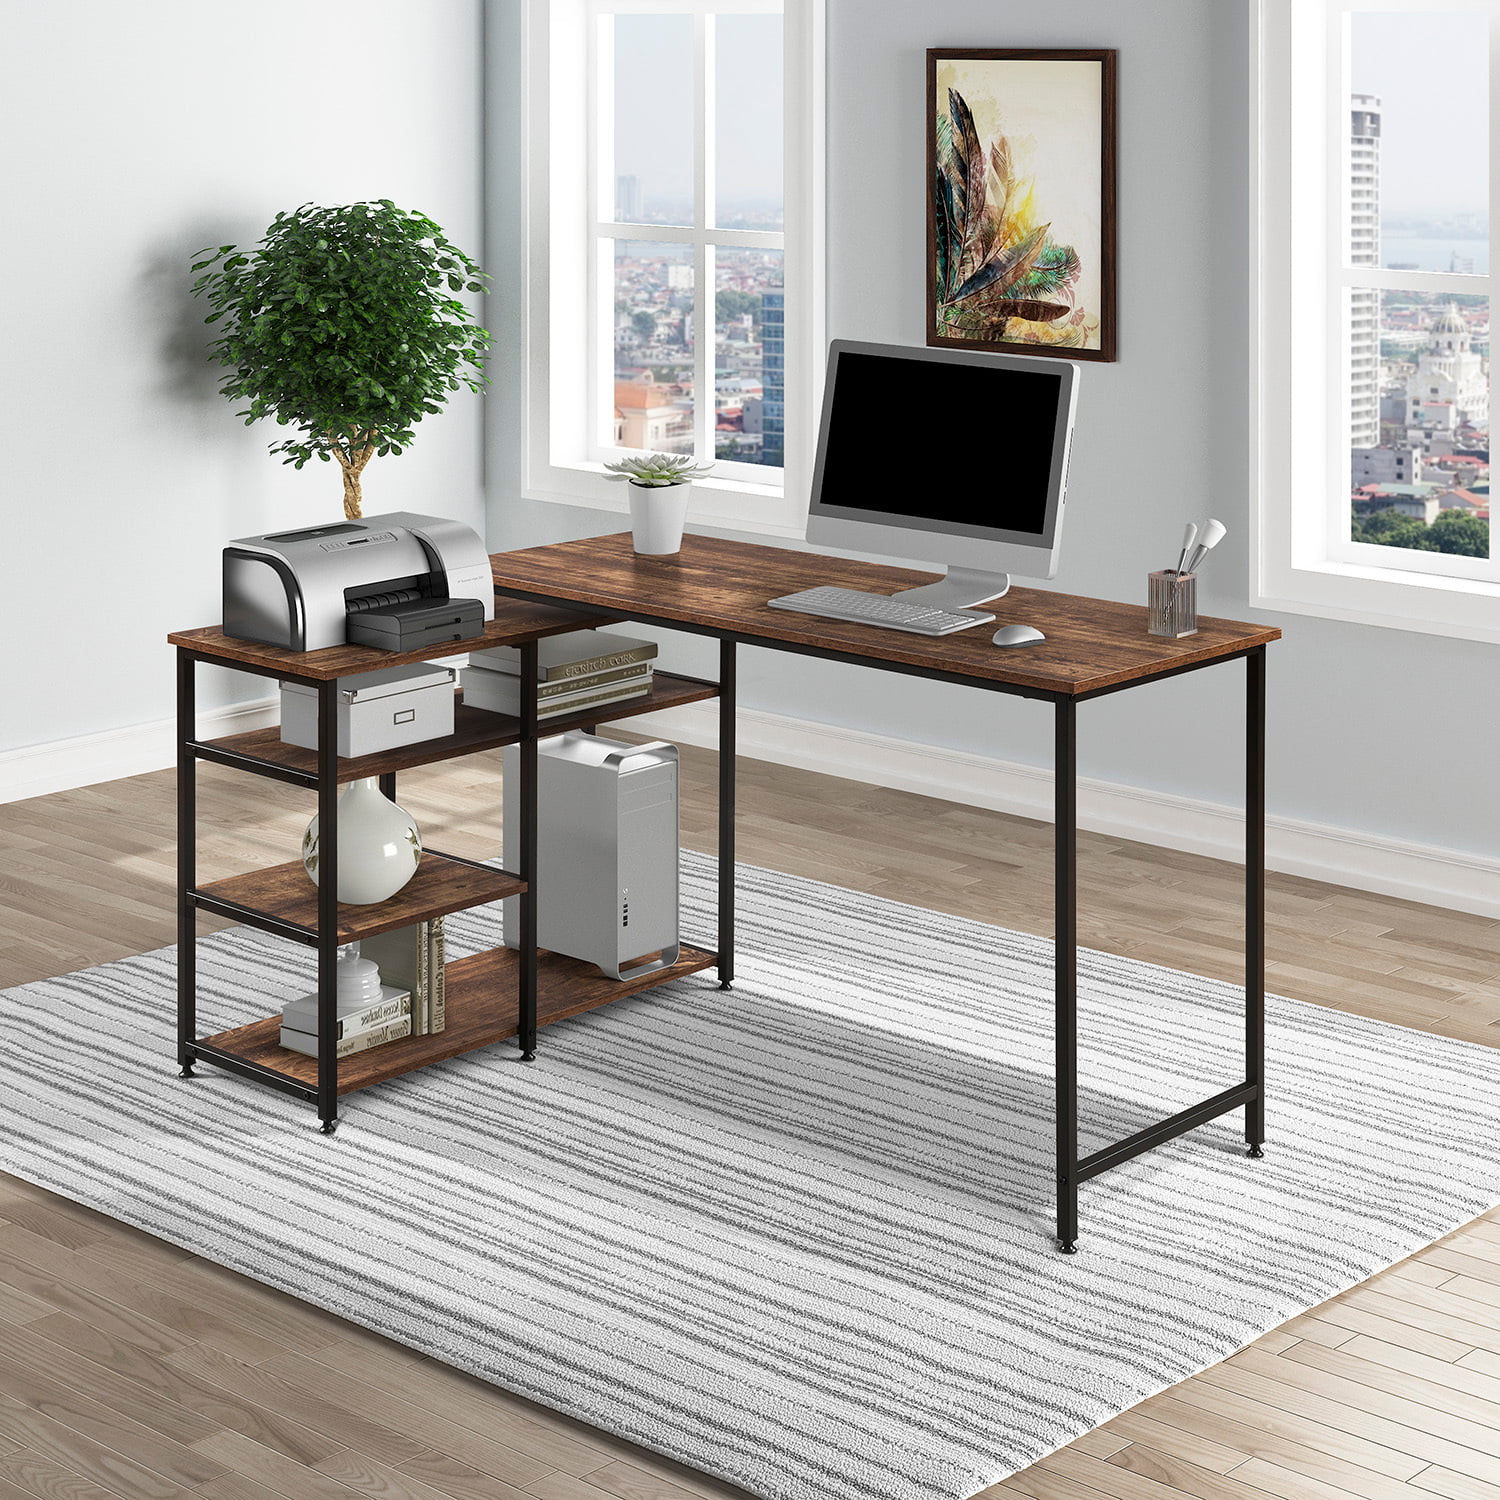 Wood Metal Industrial Desk Writing Table Computer Station Home Office Furniture 